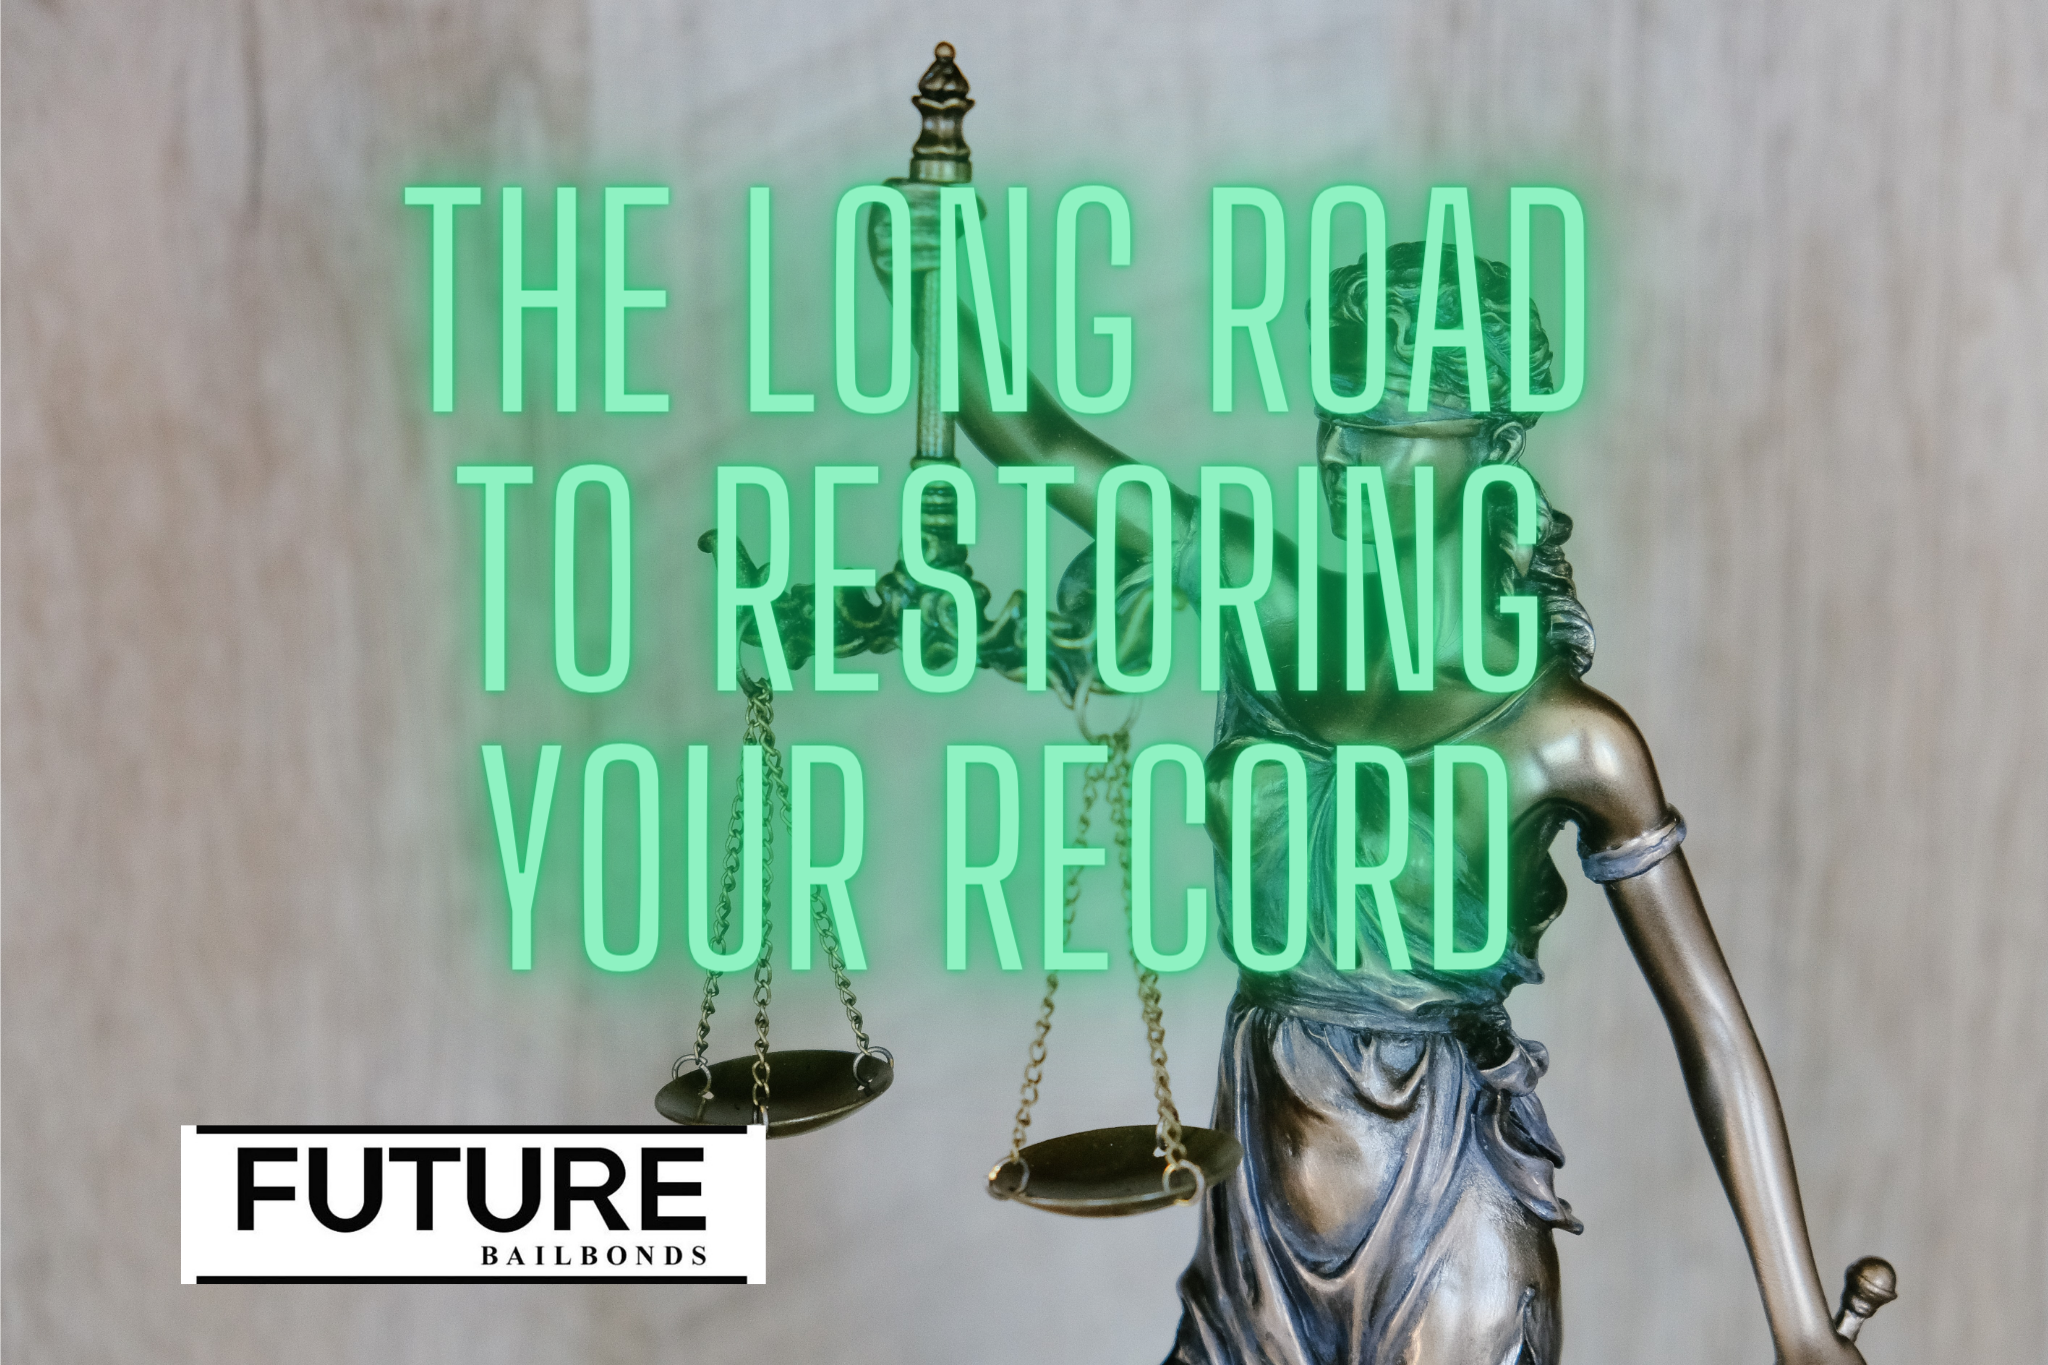 THE LONG ROAD TO RESTORING YOUR RECORD